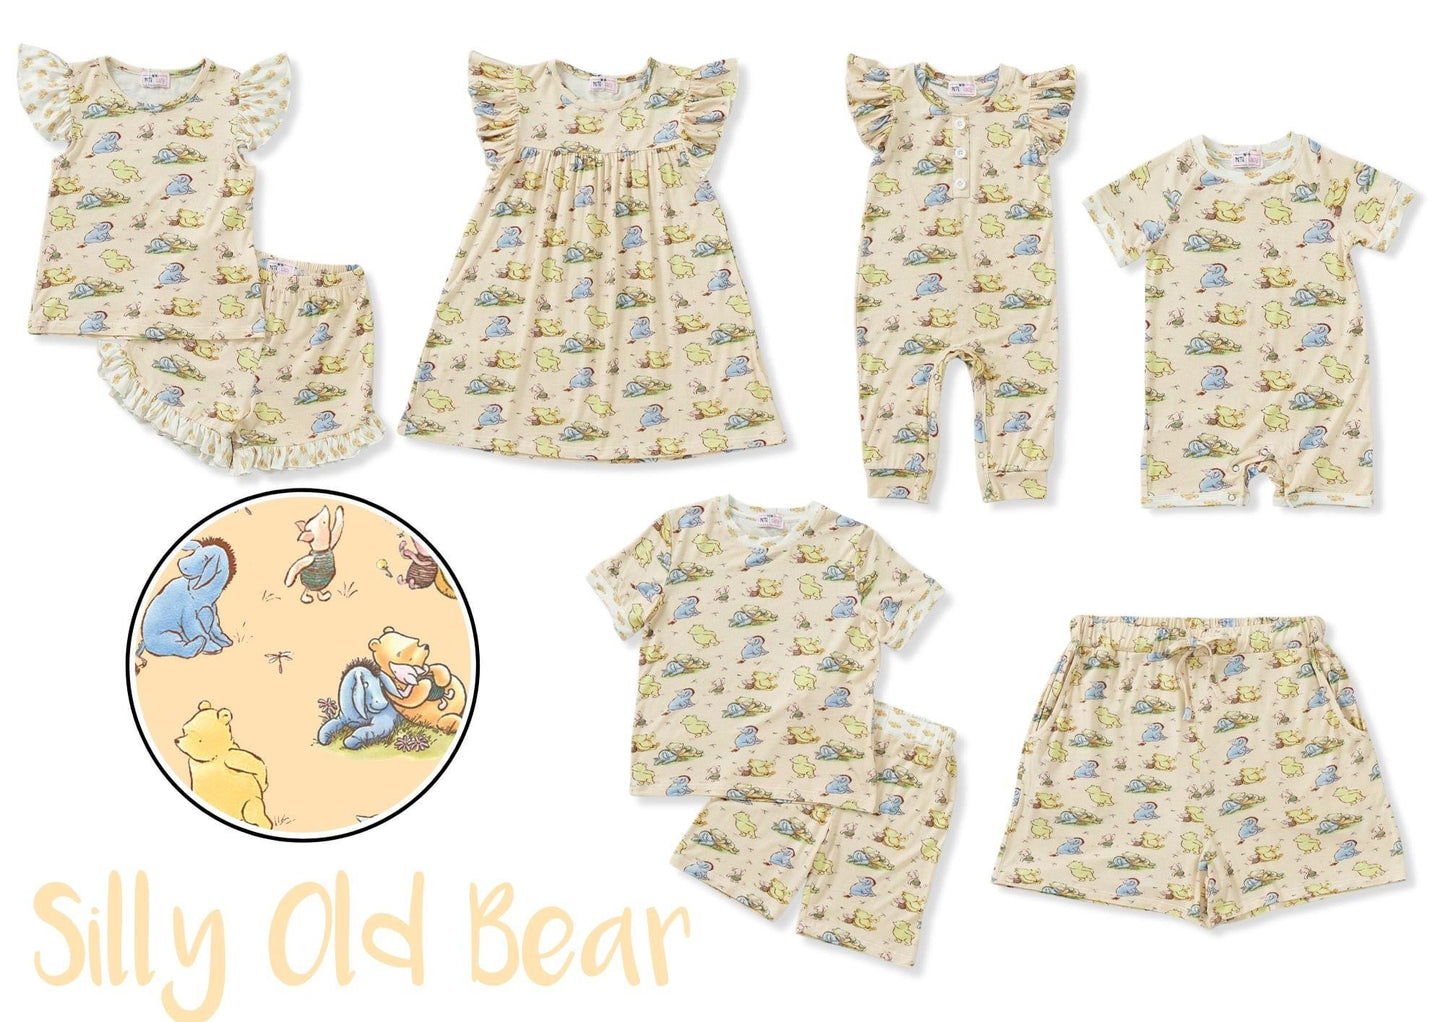 (Preorder) Silly Old Bear Minky Blanket by Pete + Lucy